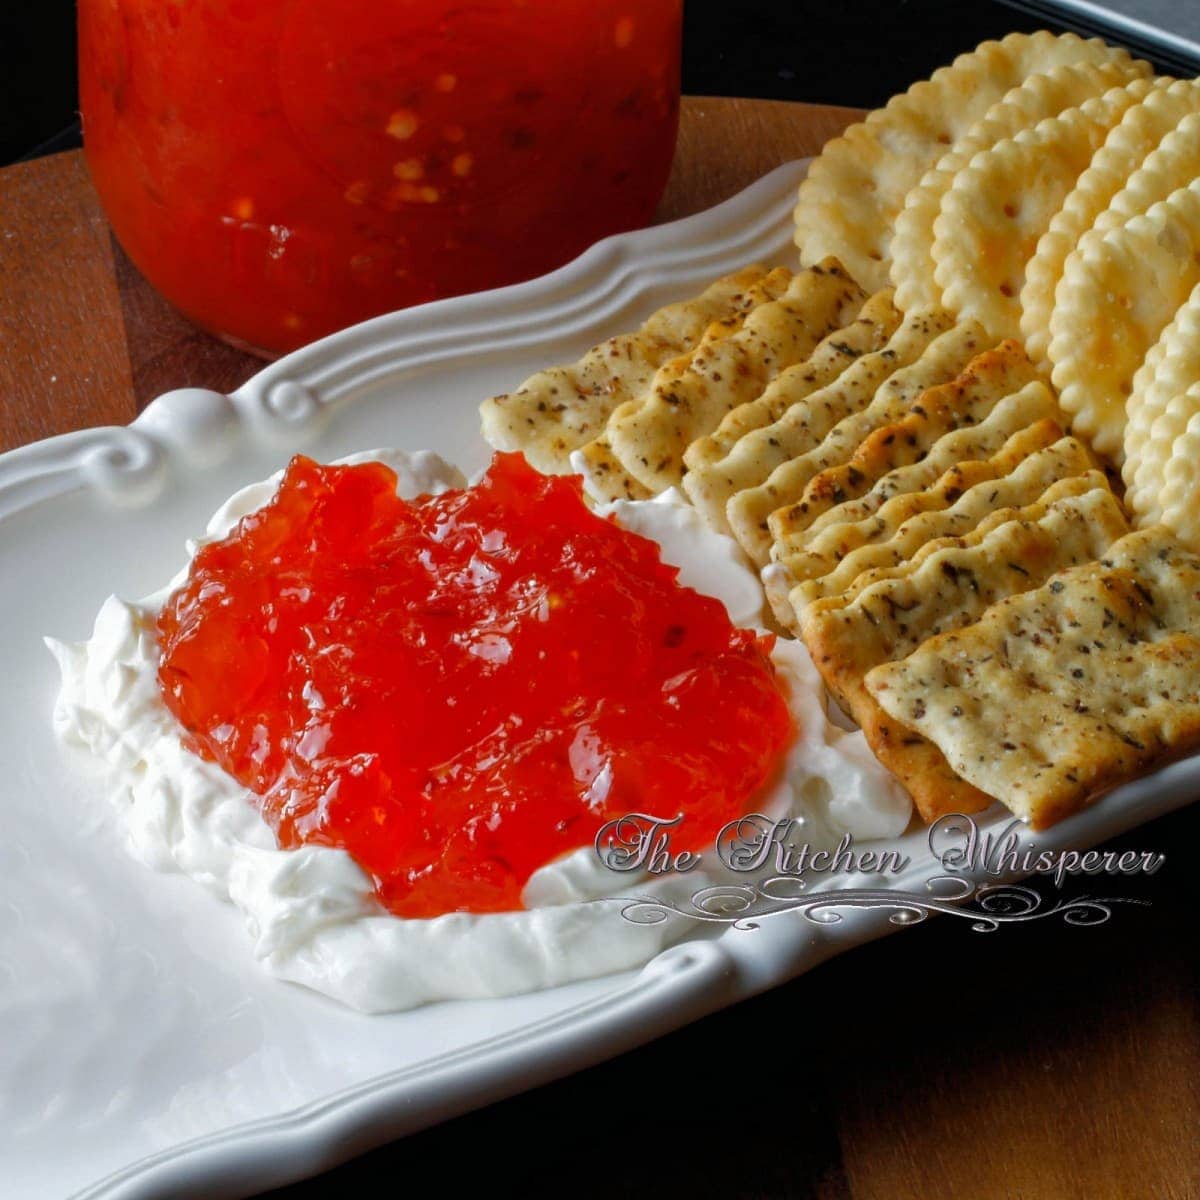 Spicy Red Pepper Jelly2